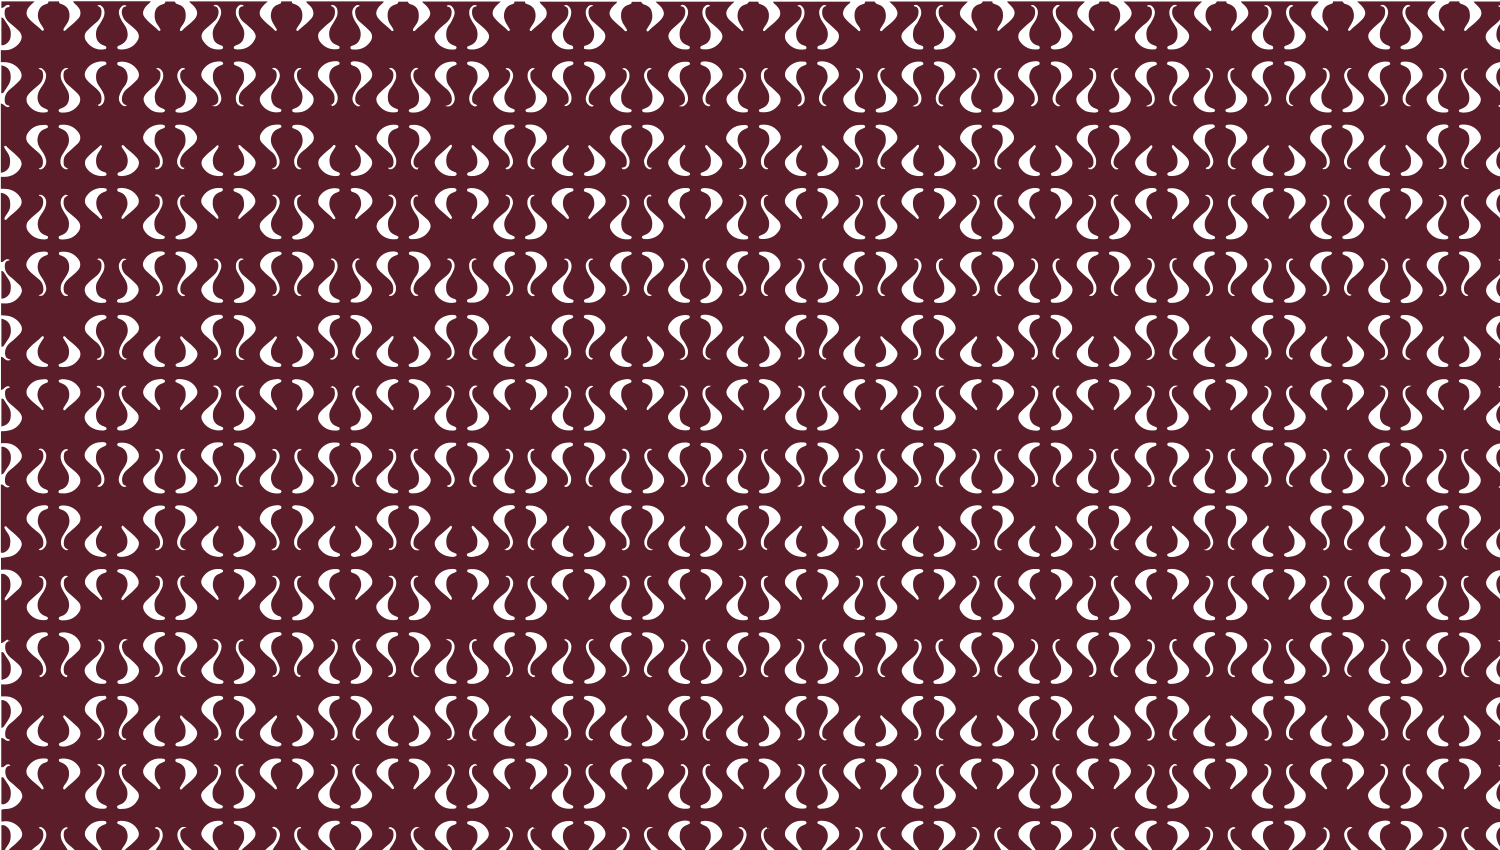 Parasoleil™ Onion© pattern displayed with a burgundy color overlay